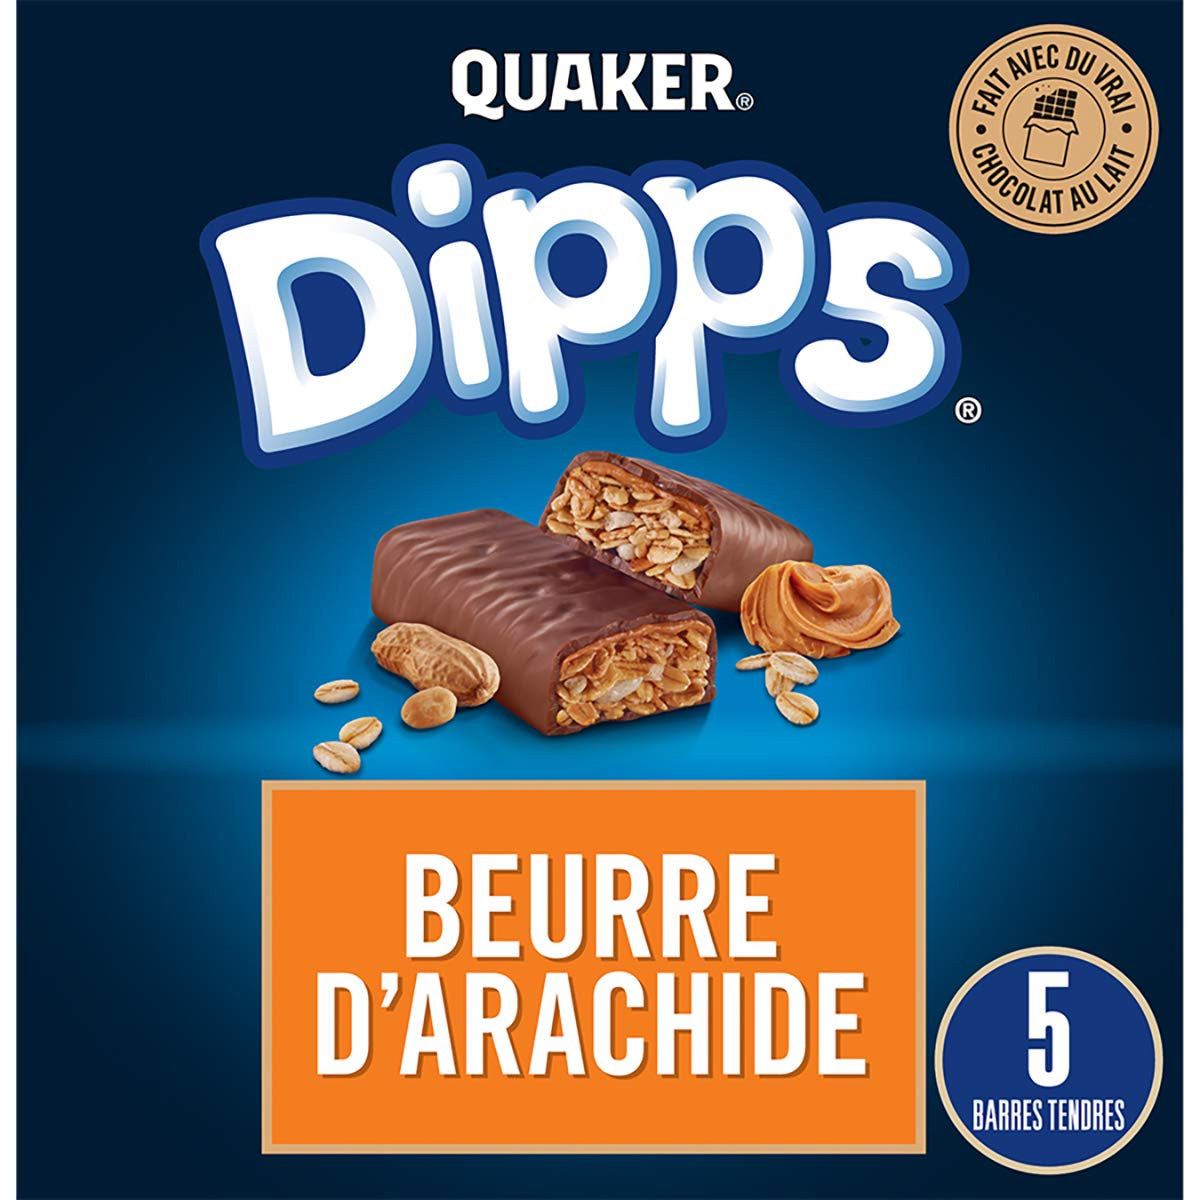 Quaker Dipps Peanut Butter Granola Bars, 5 Bar Pack (Pack of 12) {Imported from Canada}